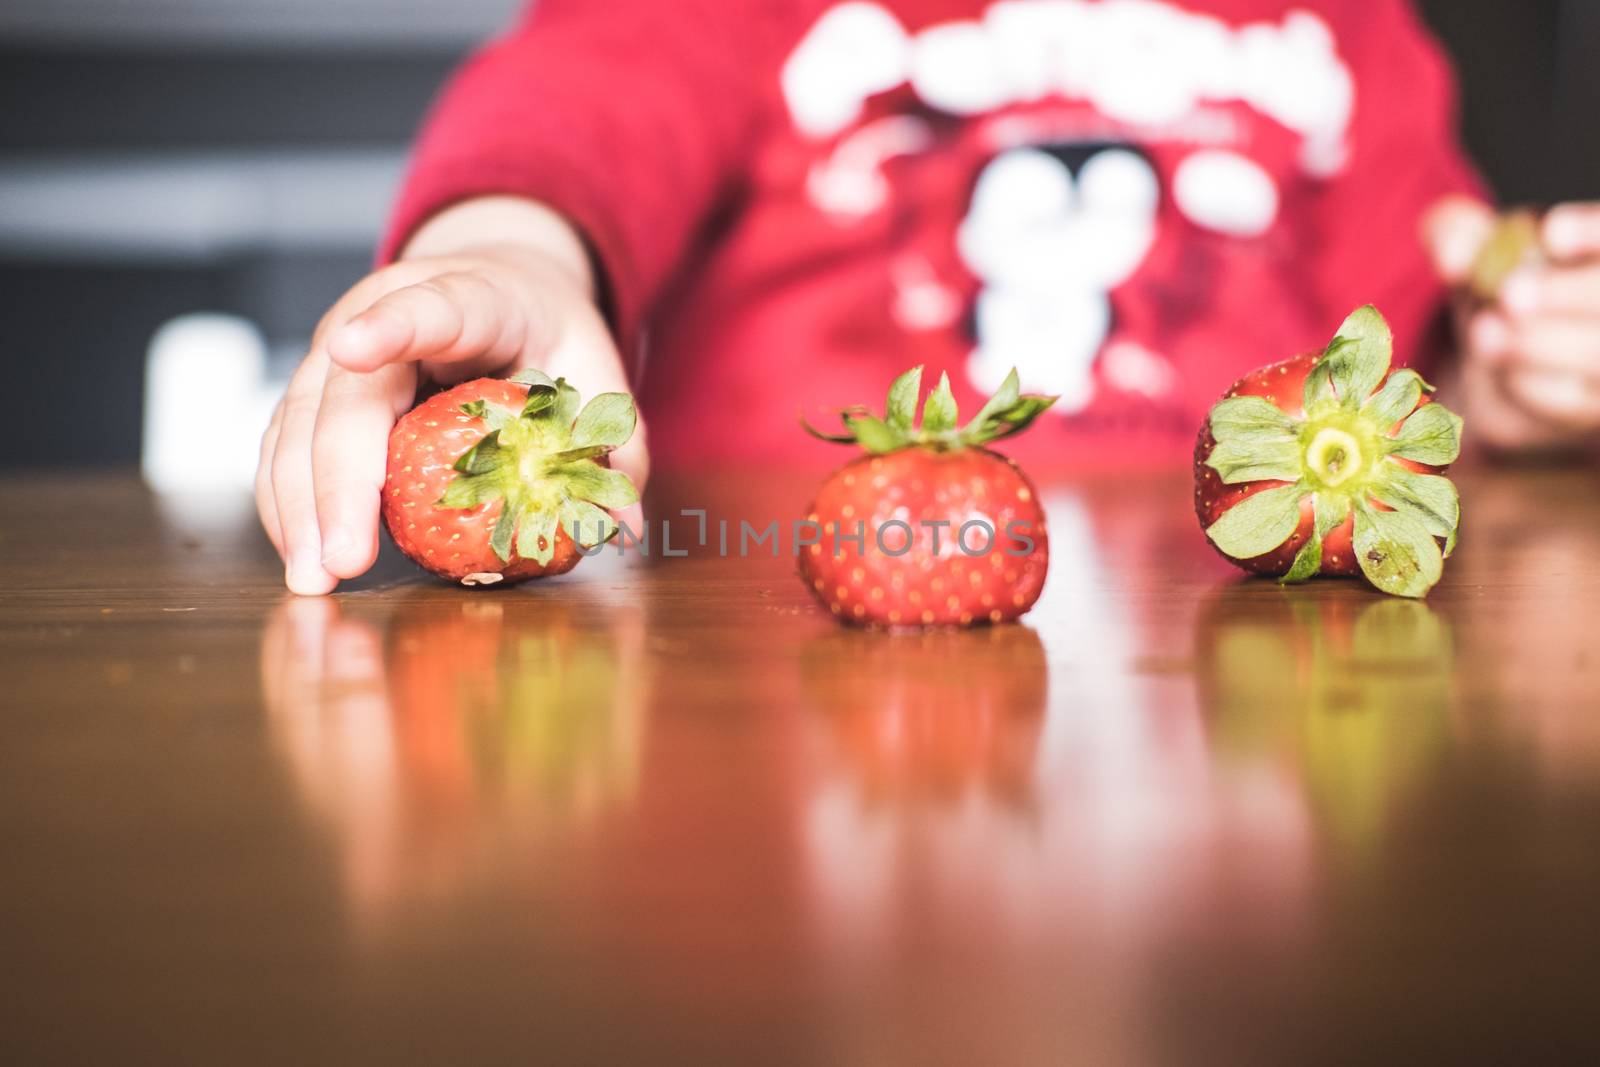 Child grabbing a strawberry from a fruit line on the table by mikelju